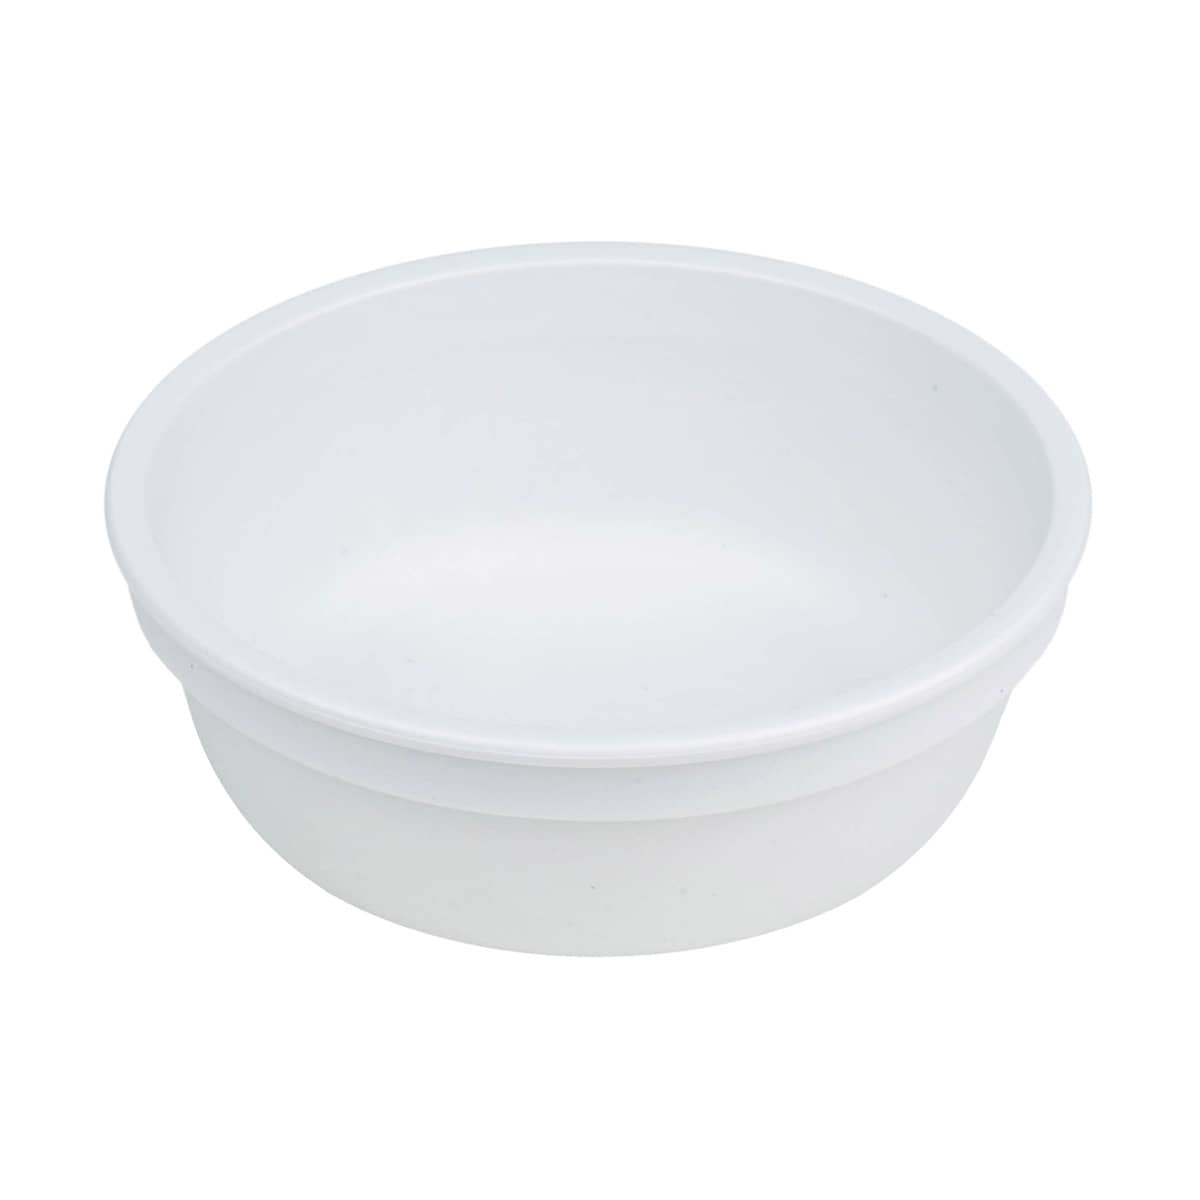 Re-Play Recycled Bowl - White